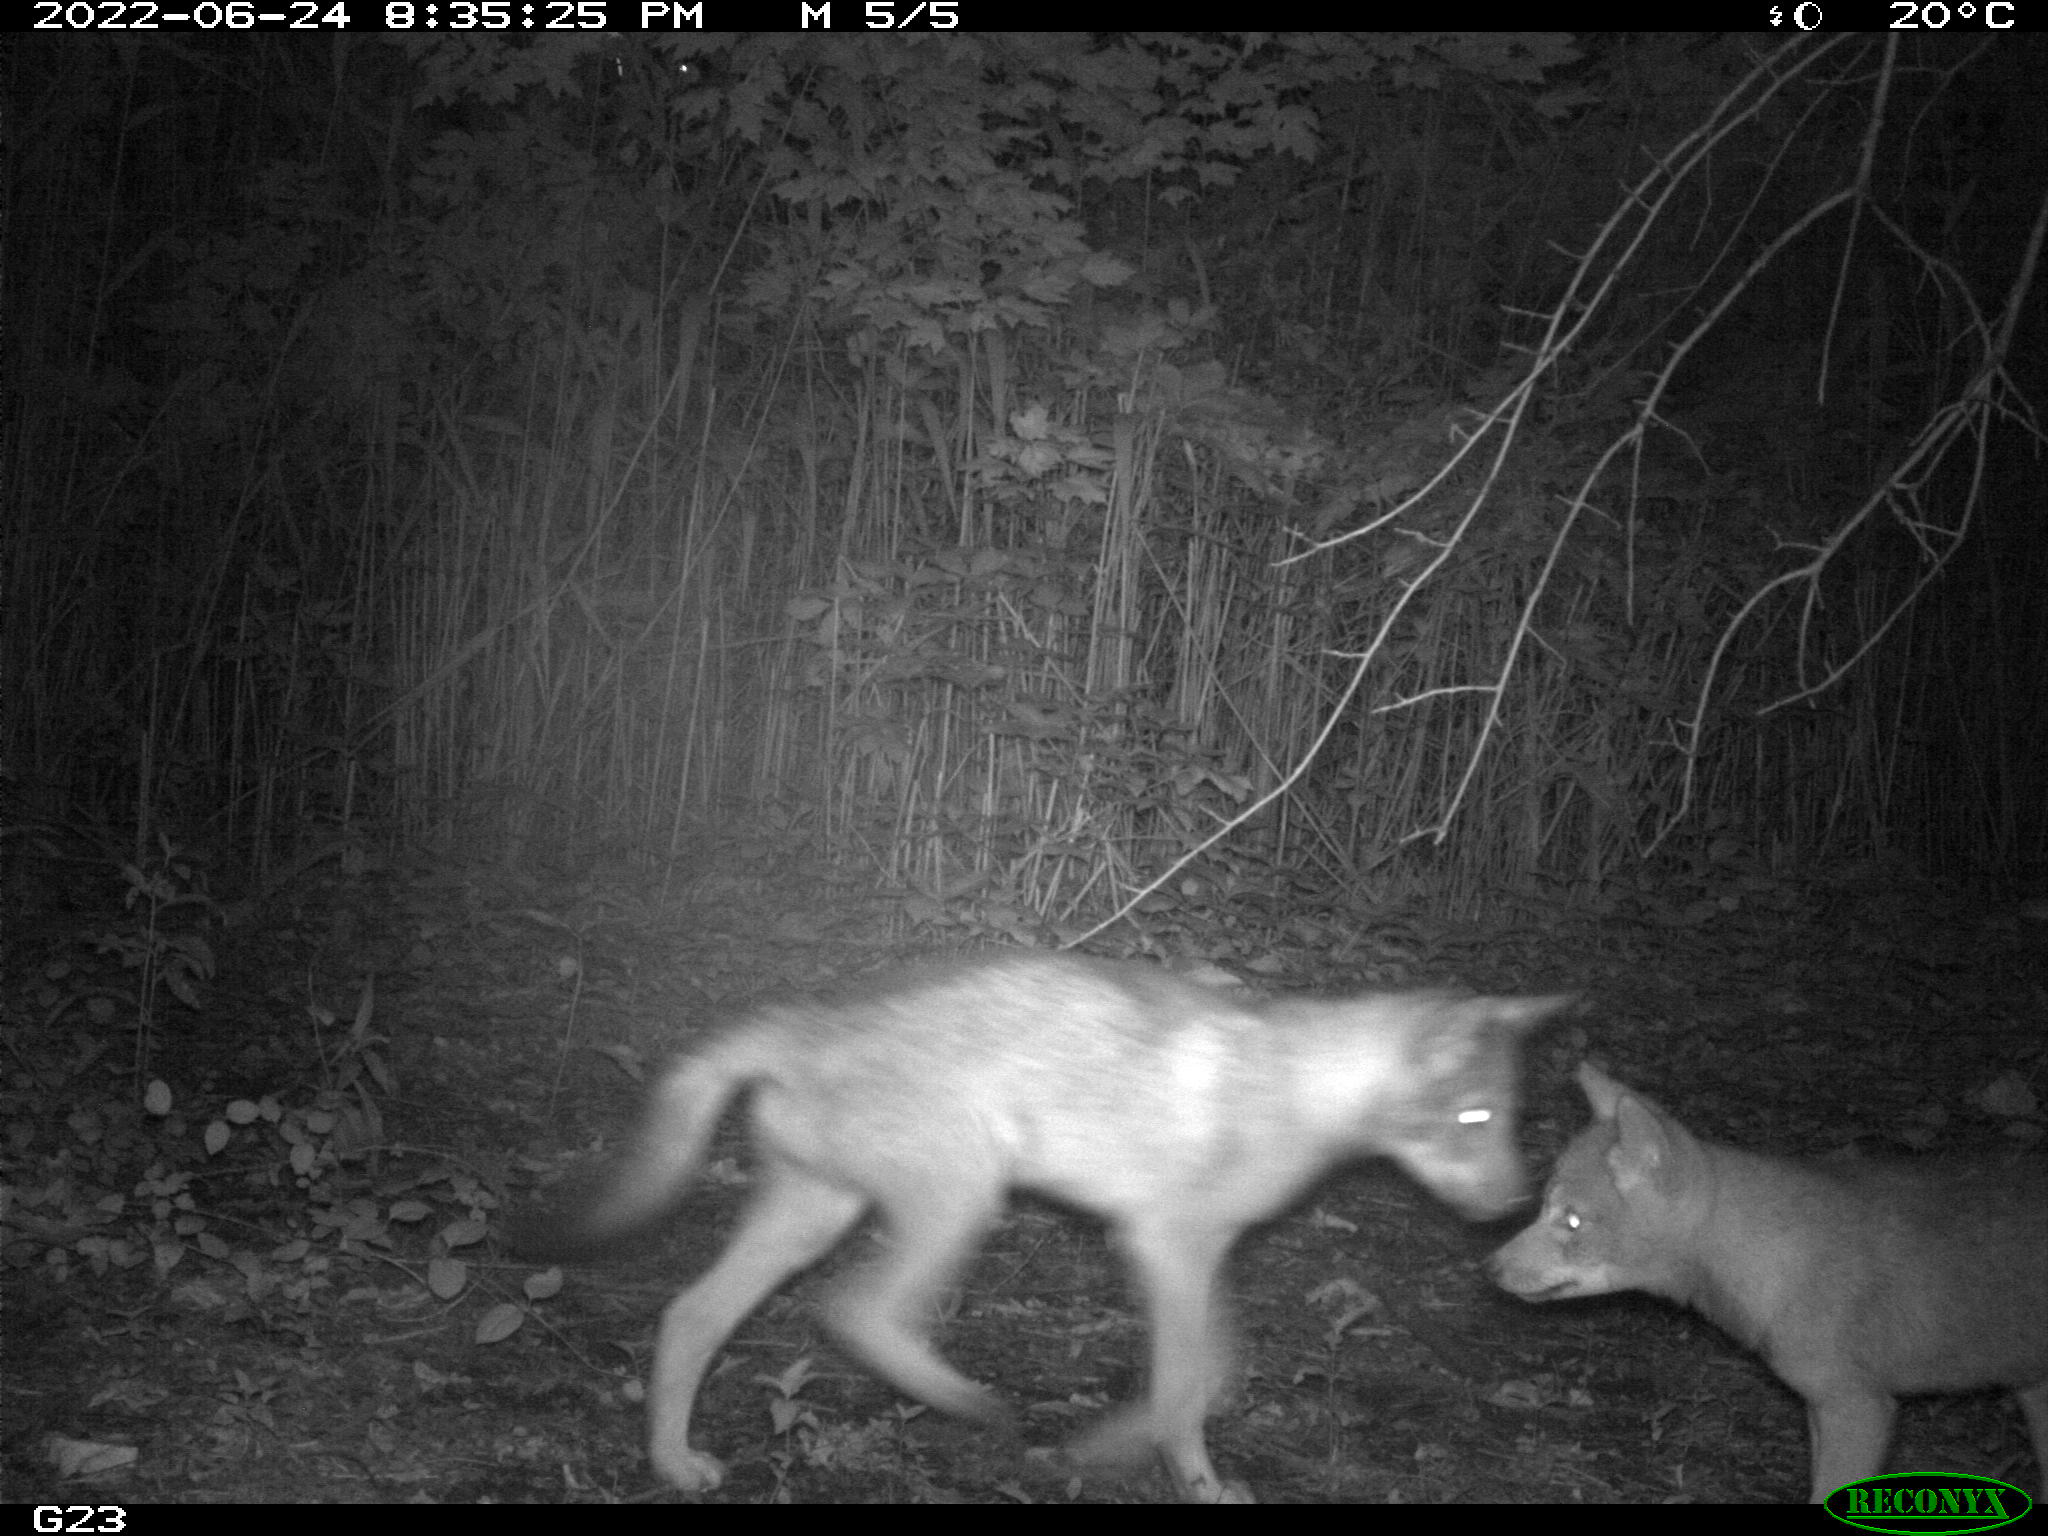 Two pups play at night captured by Gotham Coyote Project’s field cameras over the summer. Pups usually leave their parents’ home when they’re about six months old, but New York City coyotes sometimes choose to wait longer, up to more than one year.